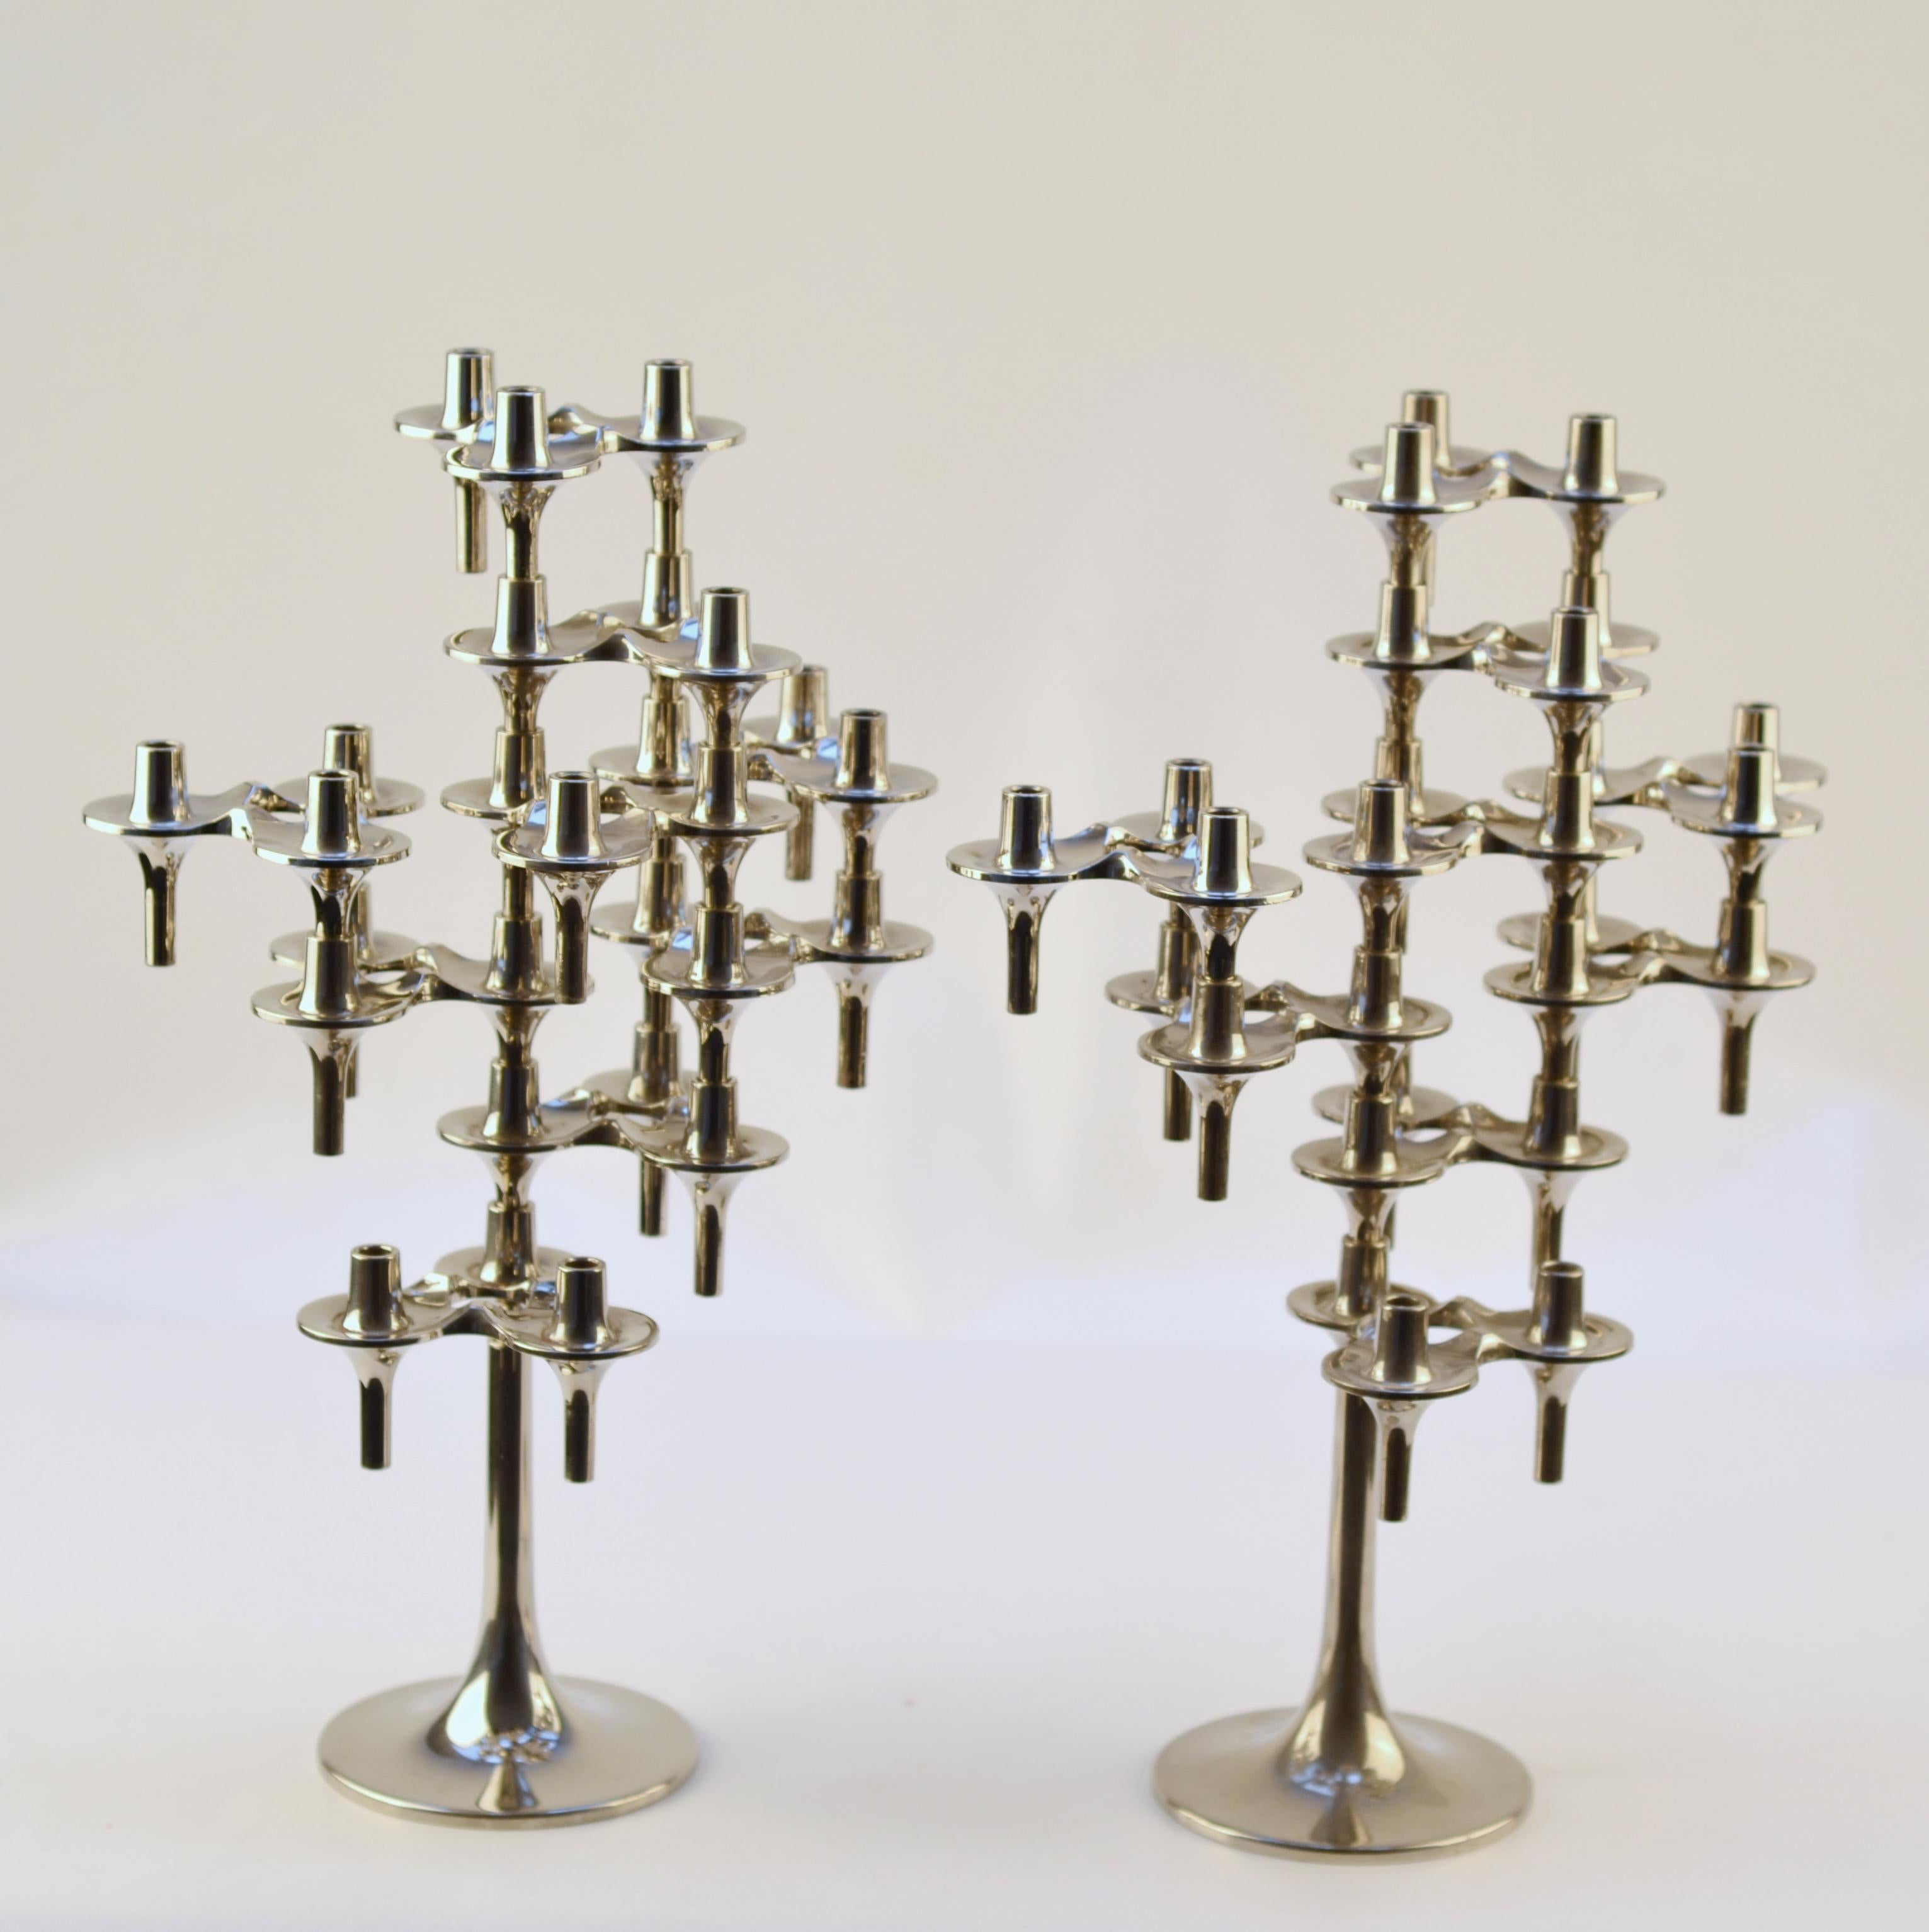 Set of two chromed candelabras stands with each 9 modular pieces. Orion Mid-Century Modern candle holders were designed by Fritz Nagel & Ceasar Stoffi, 1960. Orion candle holders were at manufactured by BMF (Bayerische Metallwaren Fabrik) Nagel in